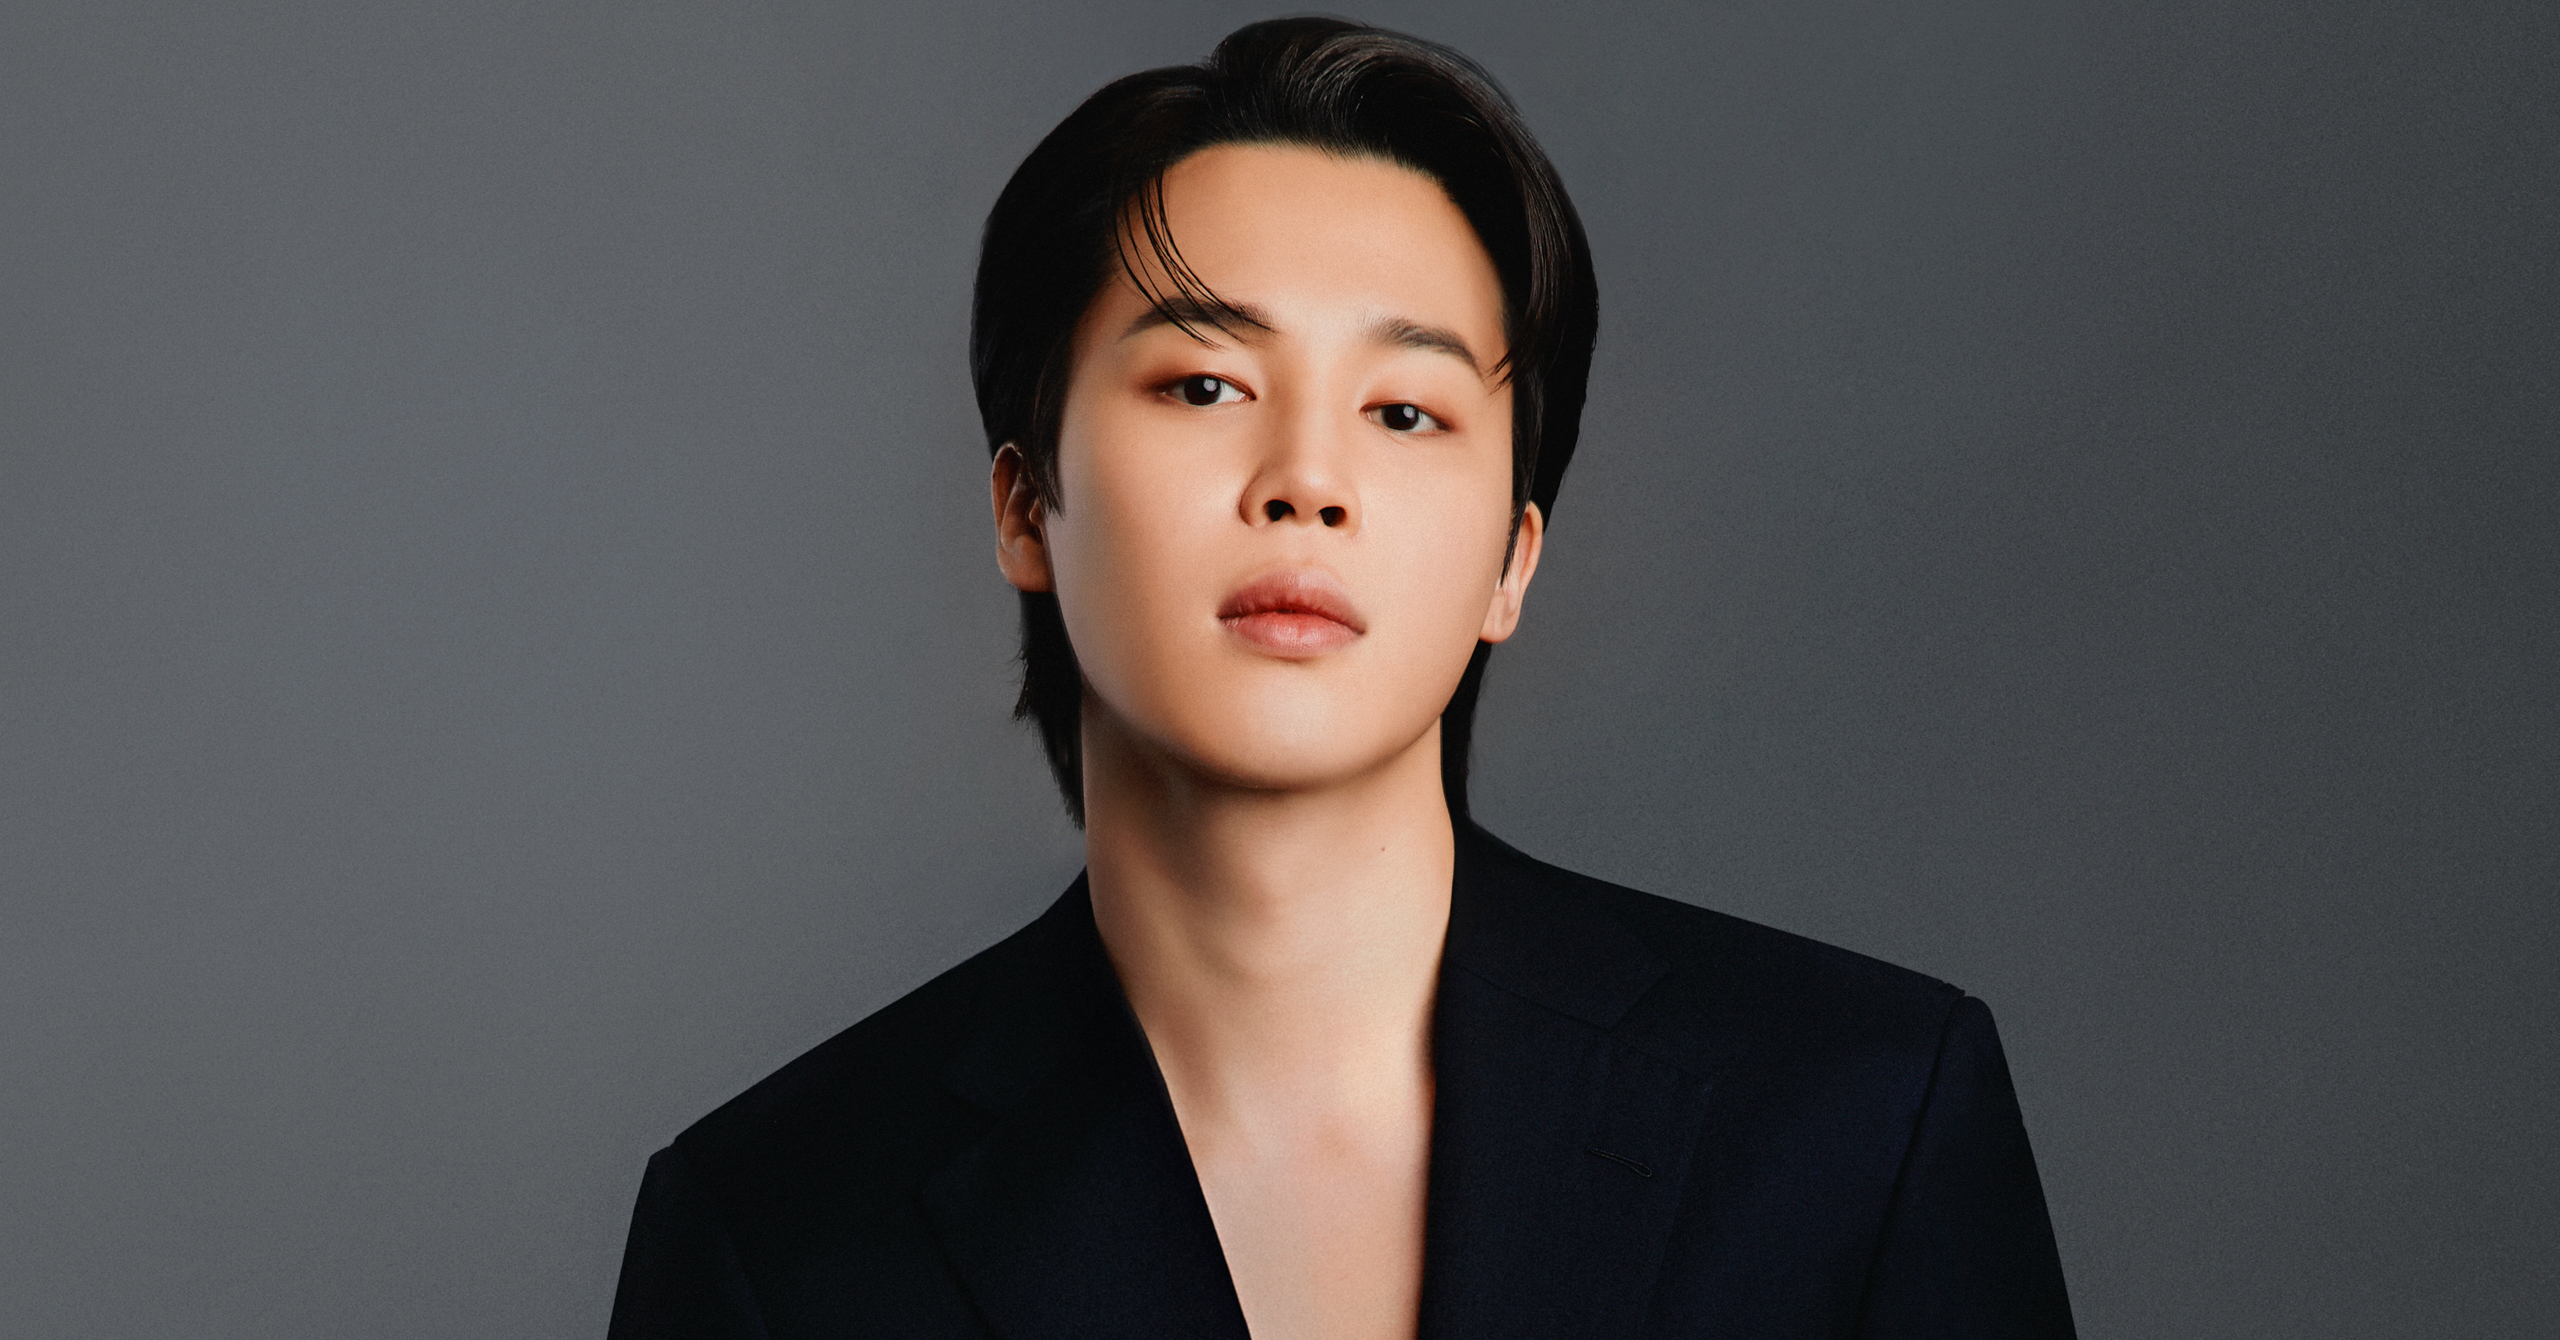 BTS's Jimin has been named as the new global ambassador for Dior men's  collections